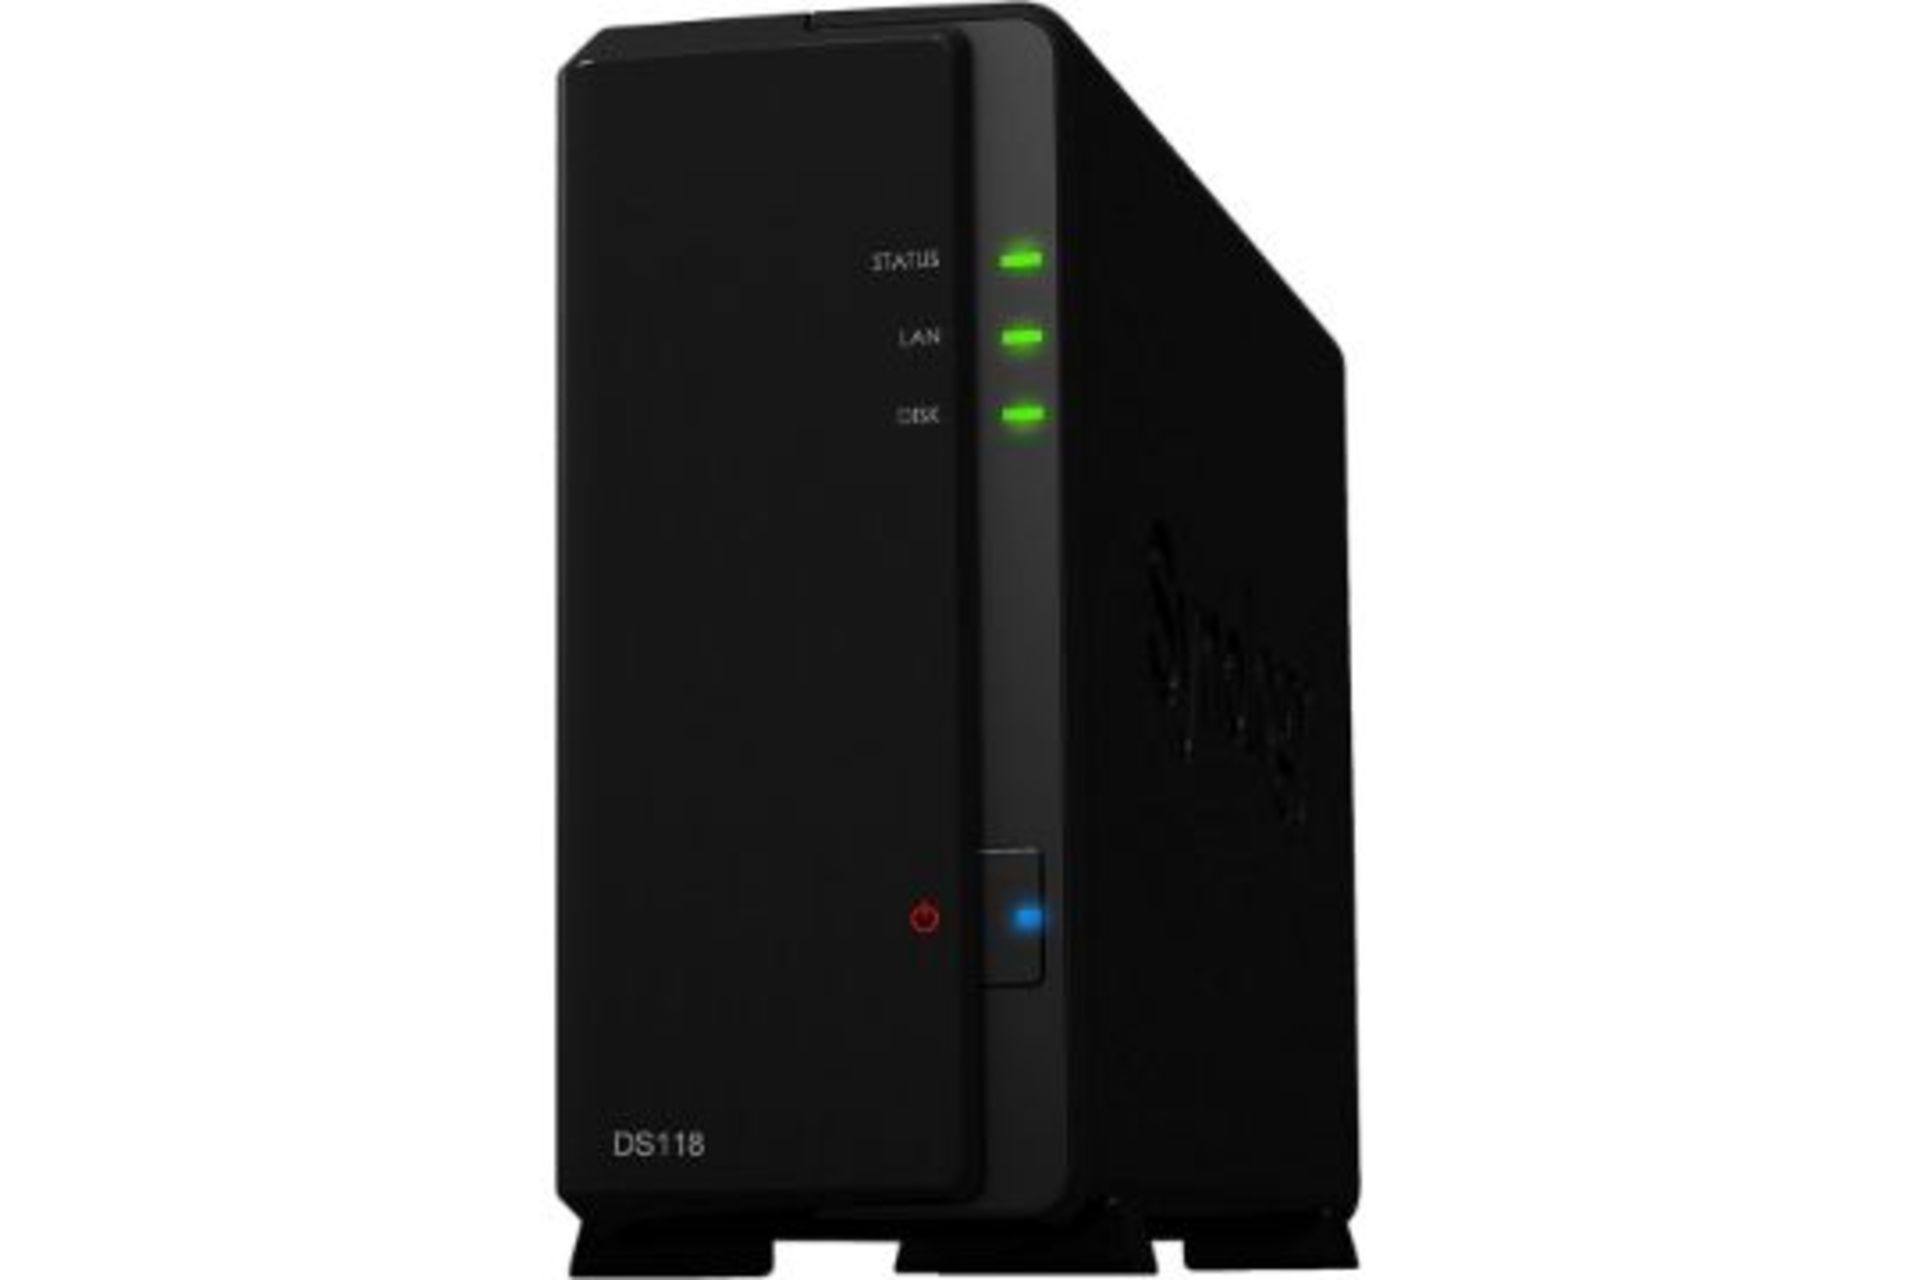 Brand New Synology DS118 1 Bay Desktop NAS Enclosure, High-performance 1-bay NAS for small offices